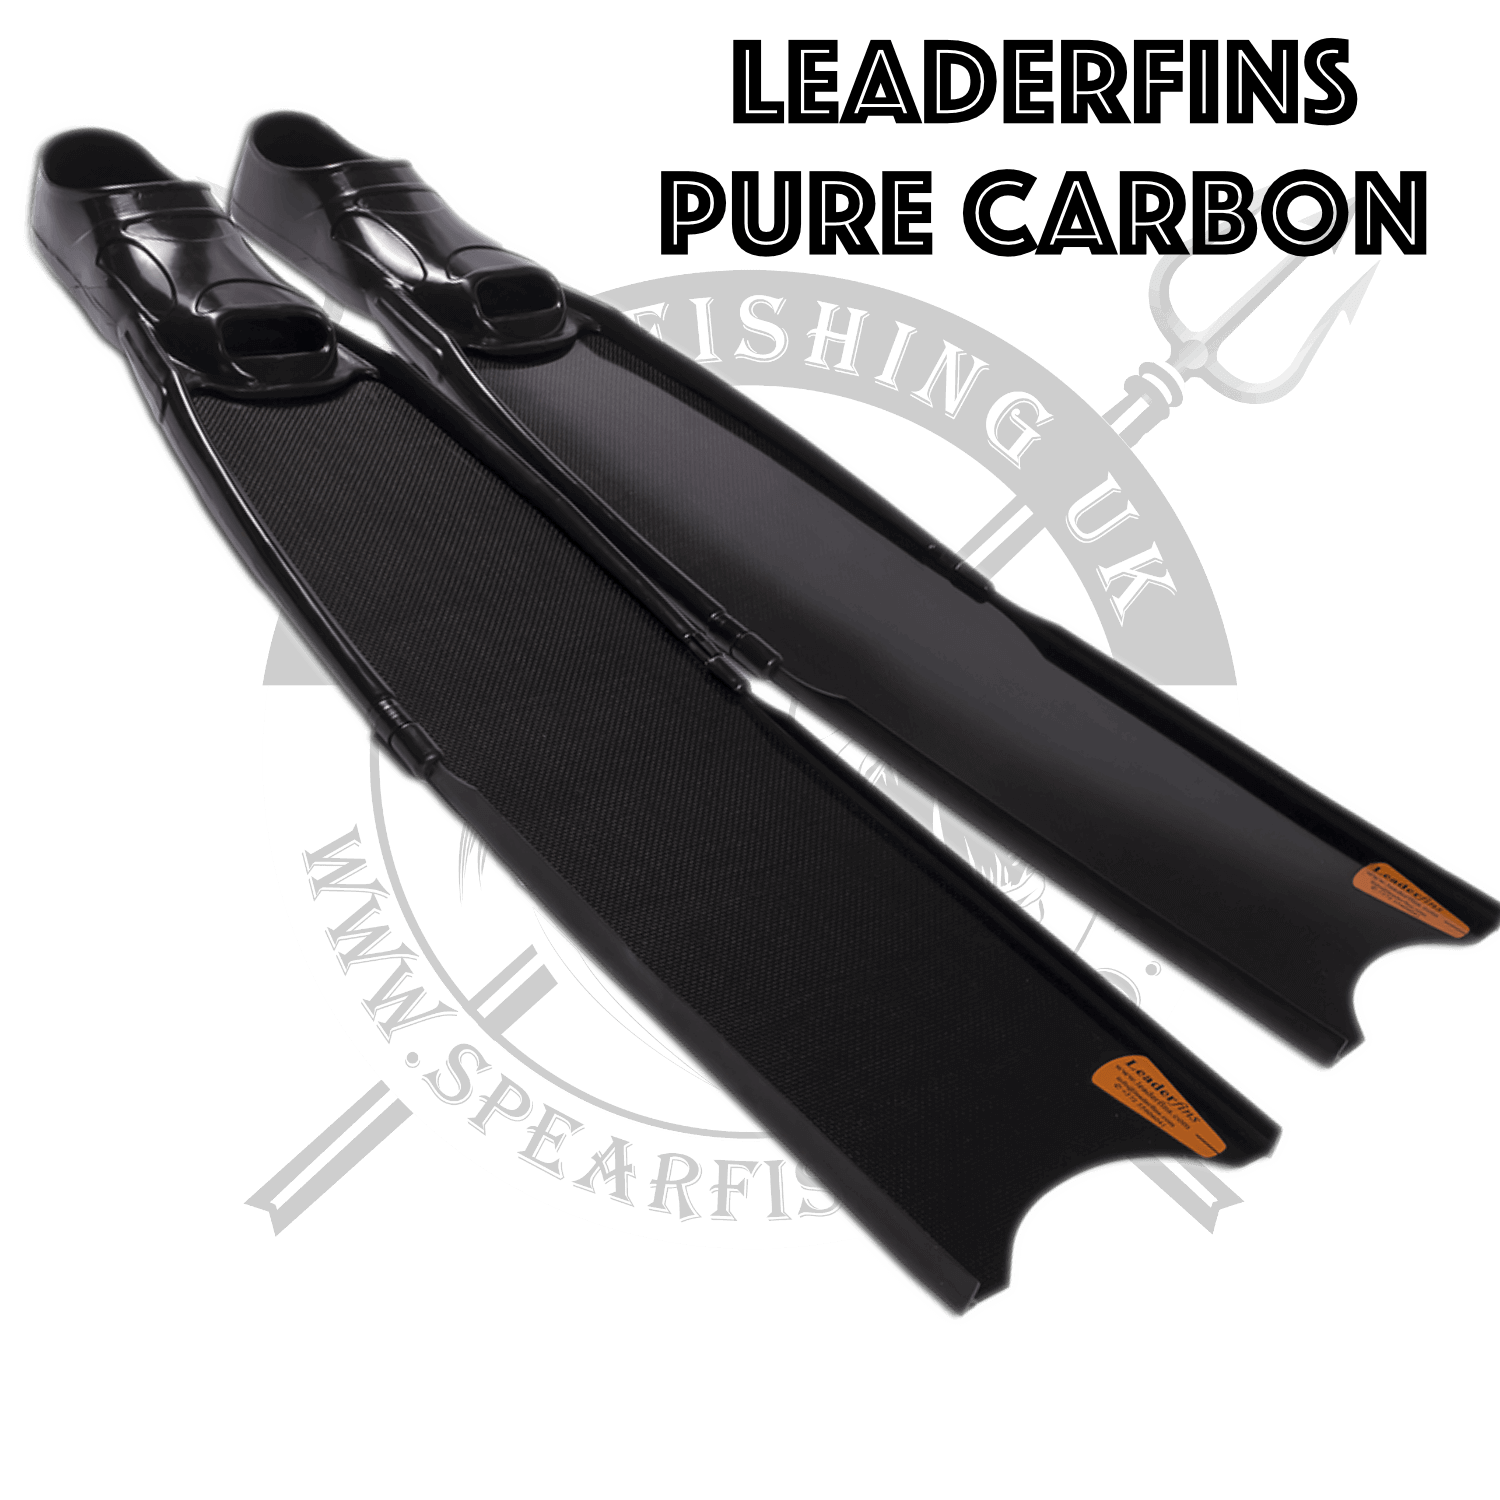 Leaderfins 100% Pure Carbon Freediving Spearfishing Fins - ALL SIZES